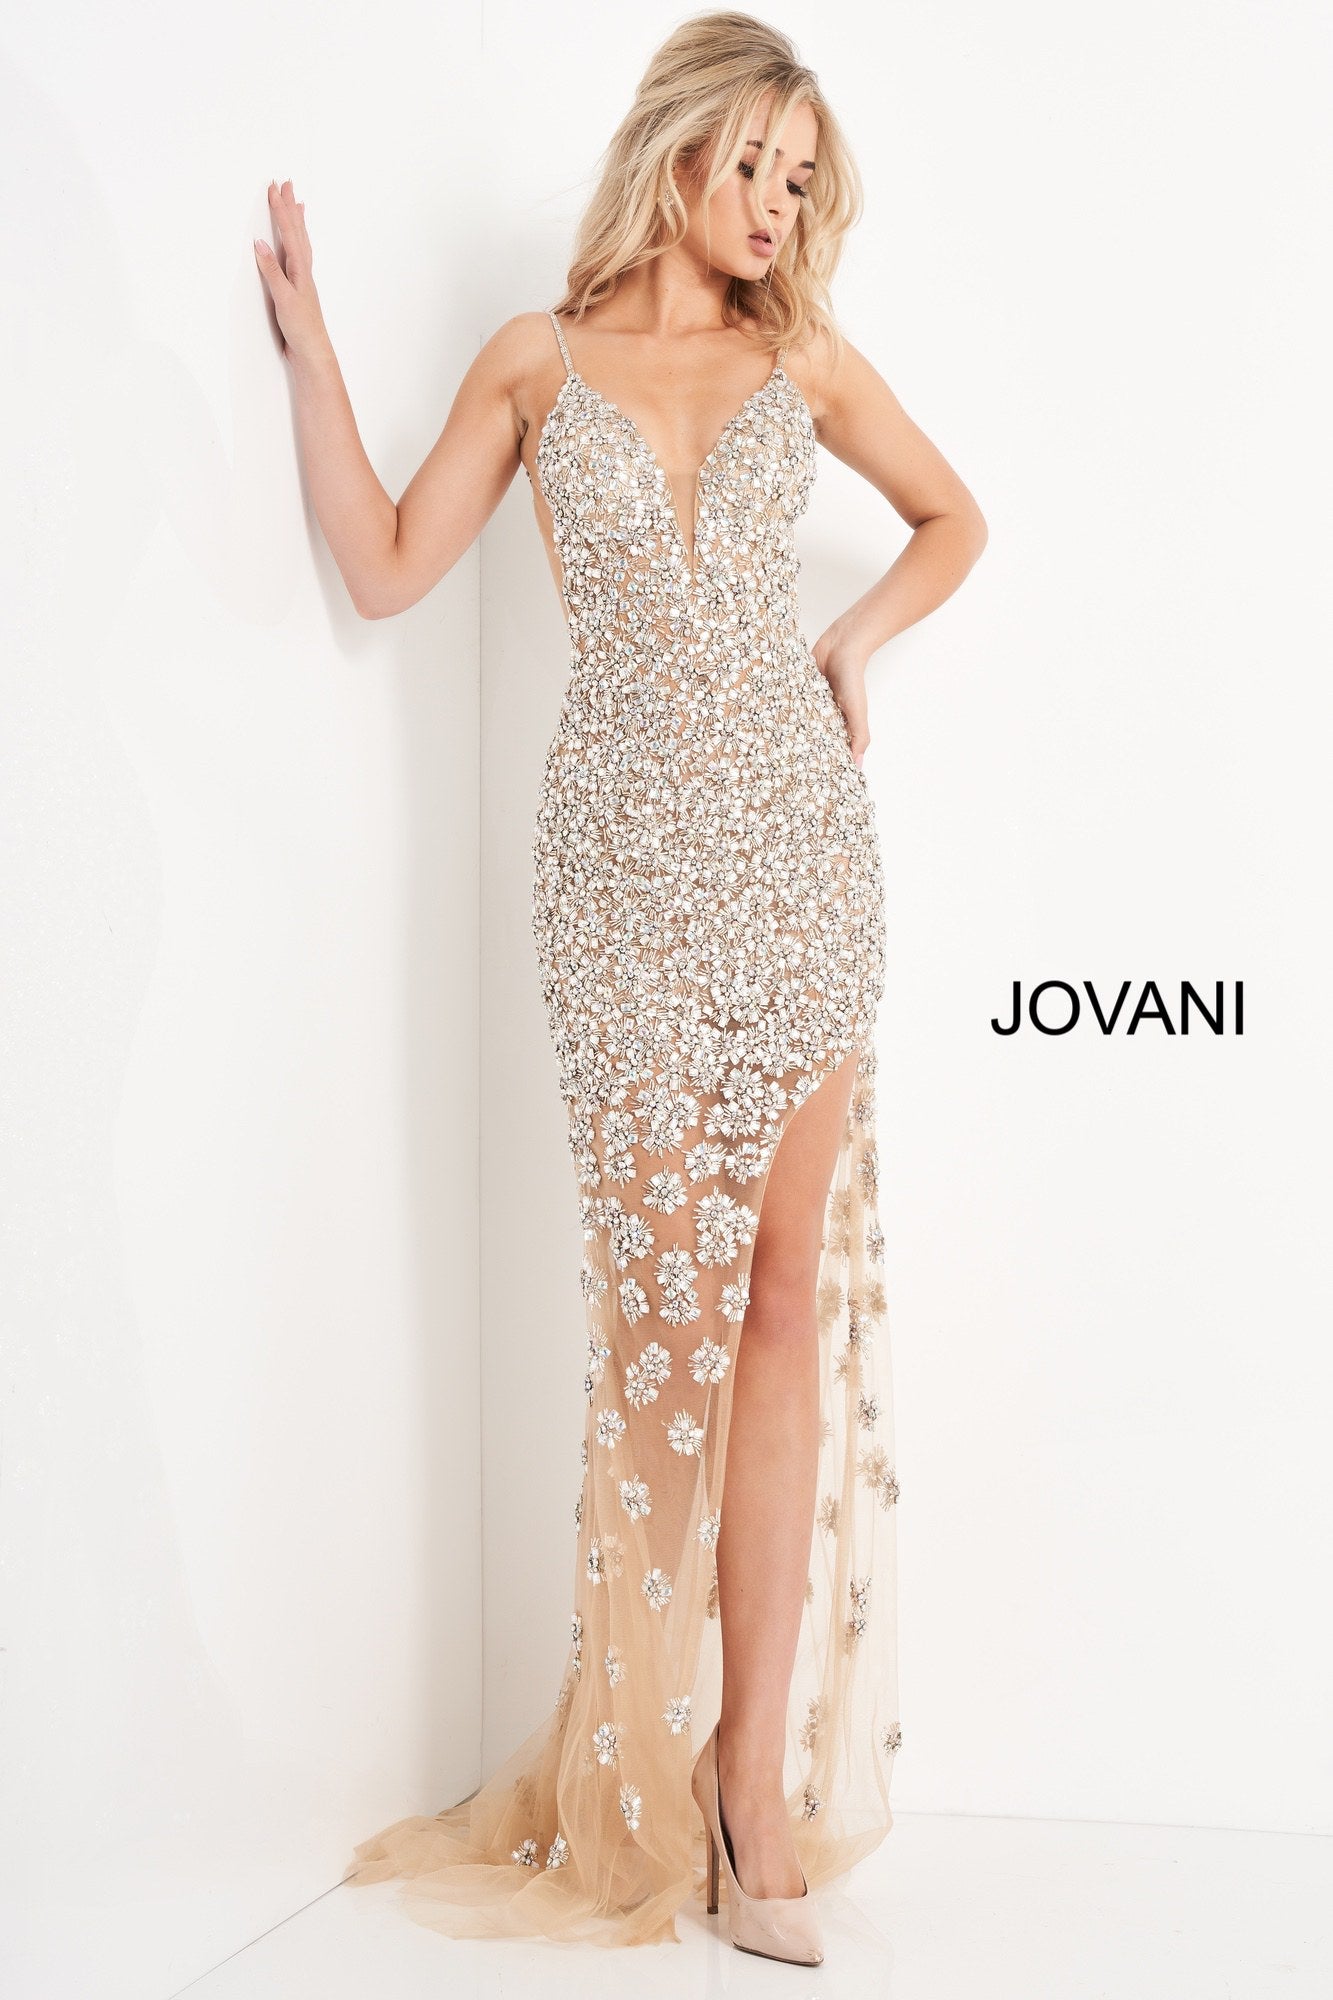 Jovani 02492 is a Stunning Nude Sheer formal evening gown. Red Carpet Ready! Plunging deep V Neckline with embellished spaghetti straps. open back, Backless, This gown features a wide side slit and sheer skirt with sweeping train. Fully Embellished with Crystal Rhinestones, Sequins & Beading. Great Special event Gown! Available Sizes: 00,0,2,4,6,8,10,12,14,16,18,20,22,24  Available Colors: Nude